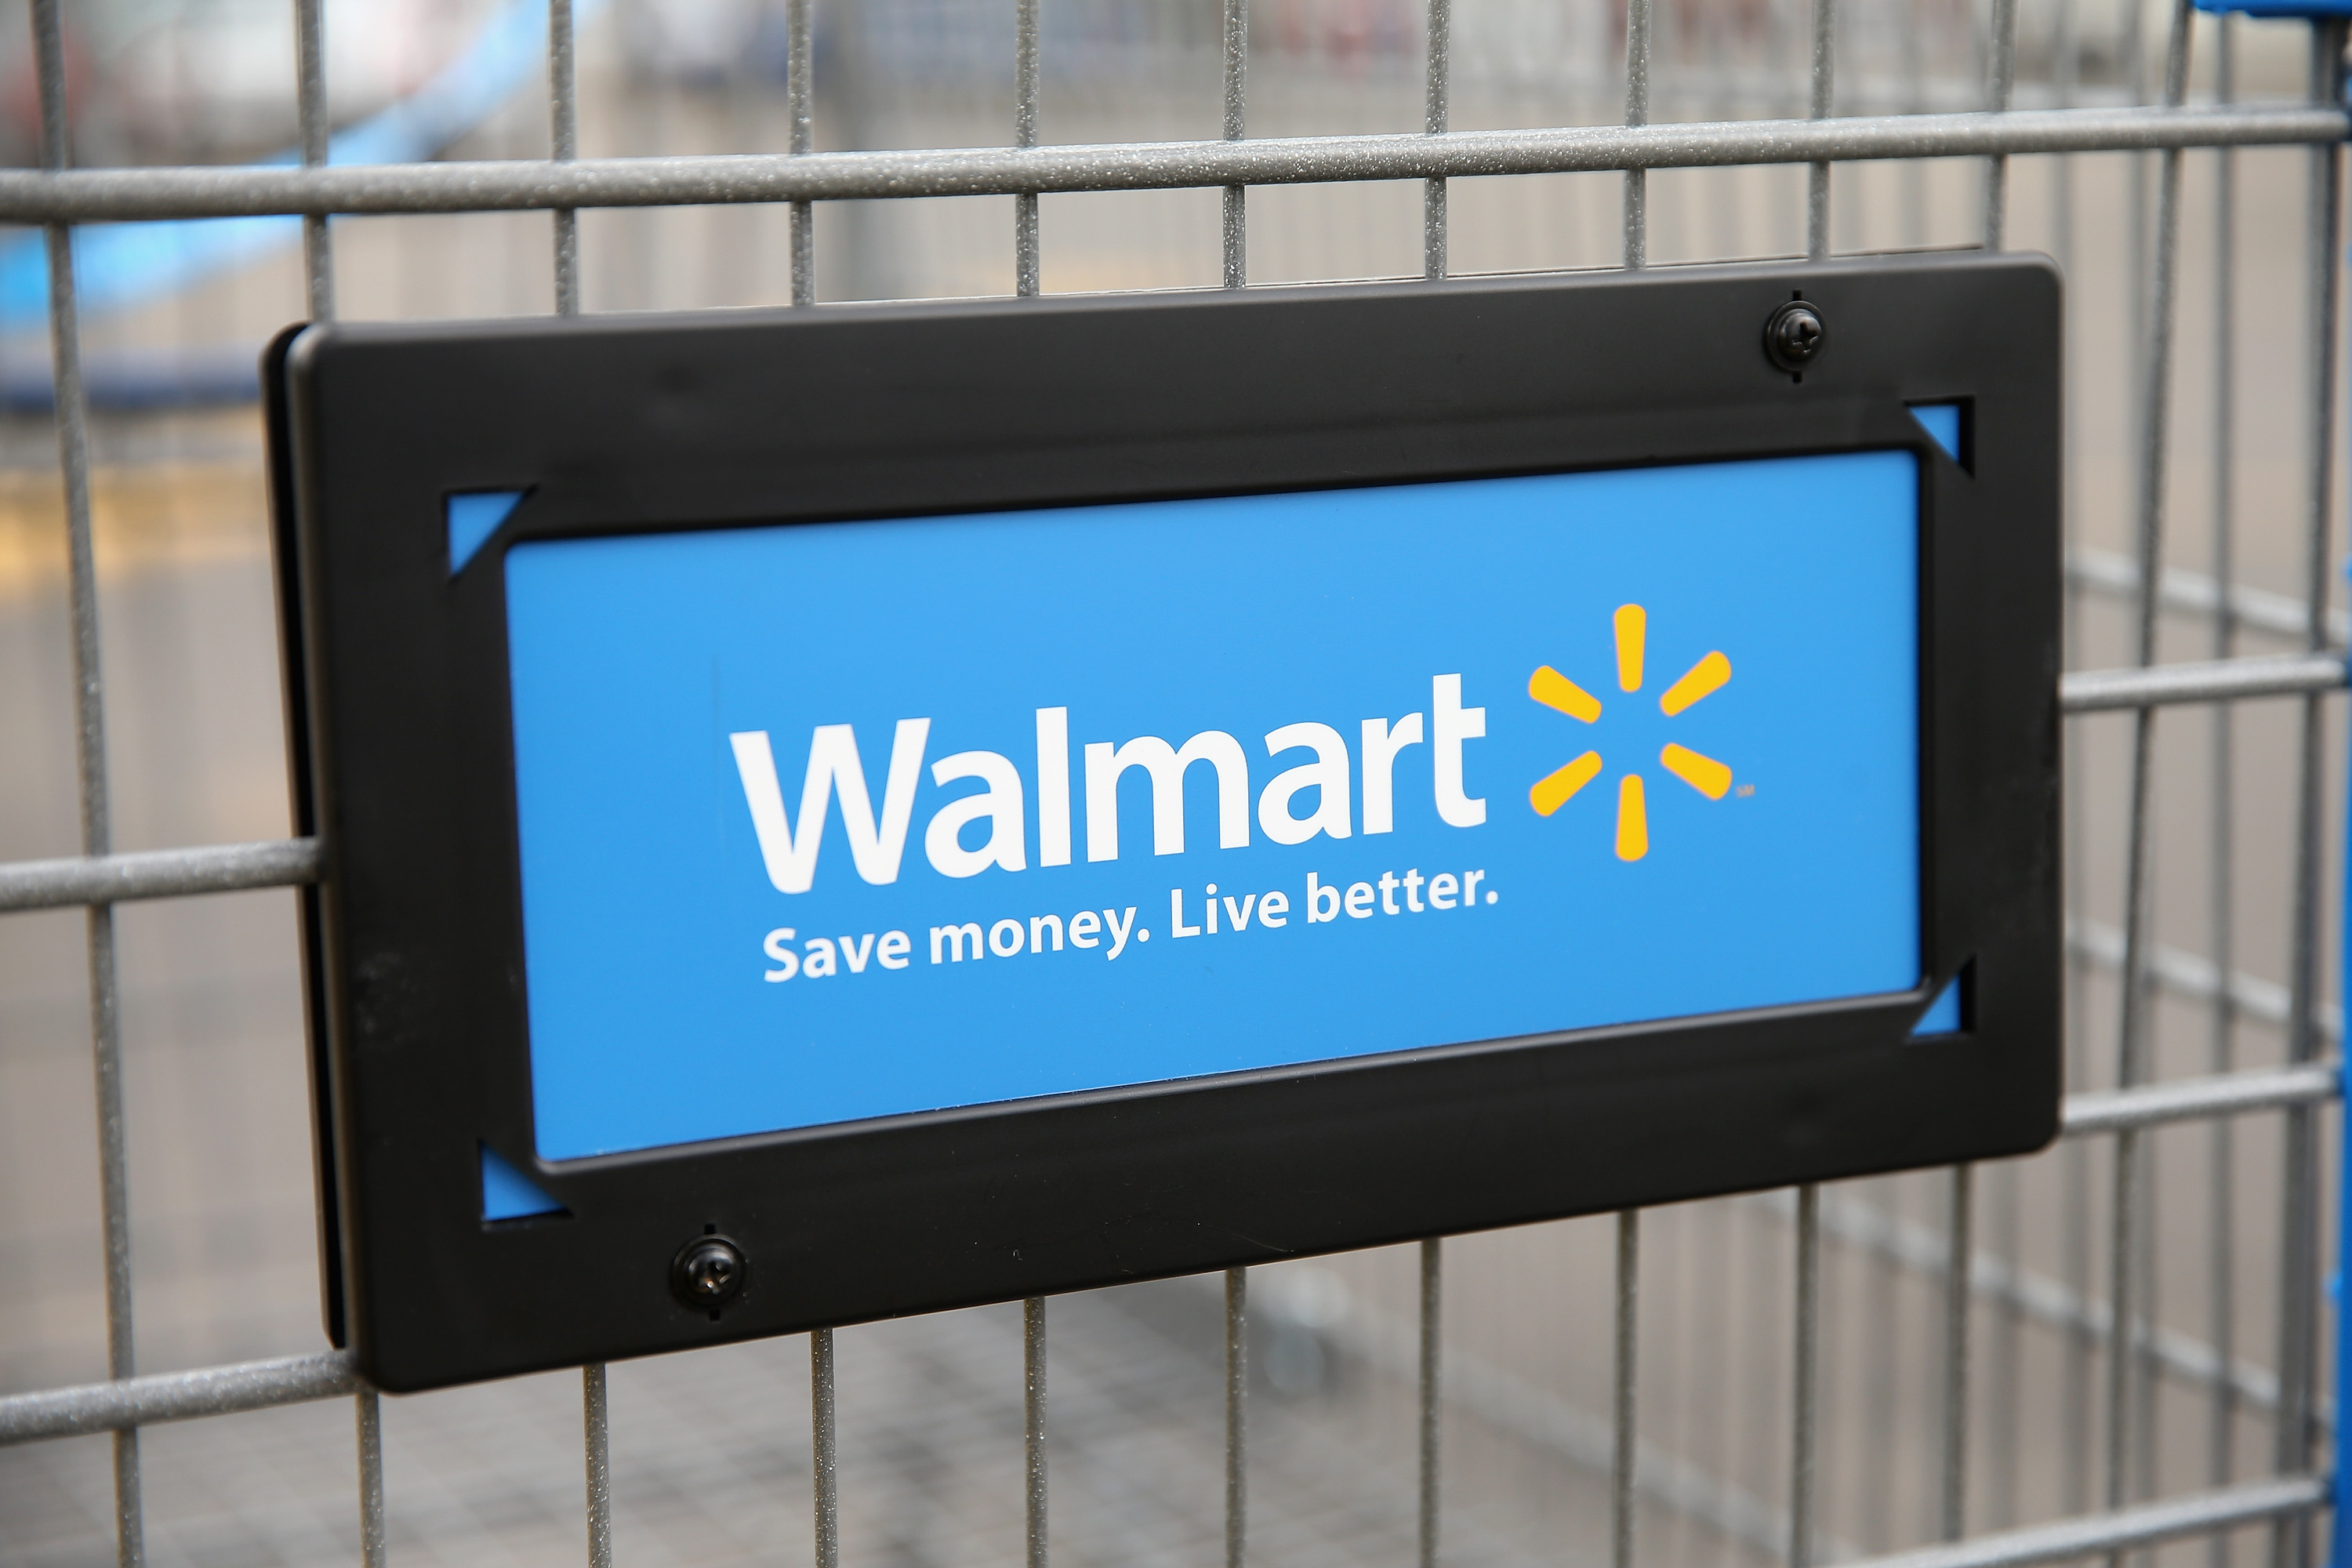 The Walmart logo is displayed on a cart in Chicago